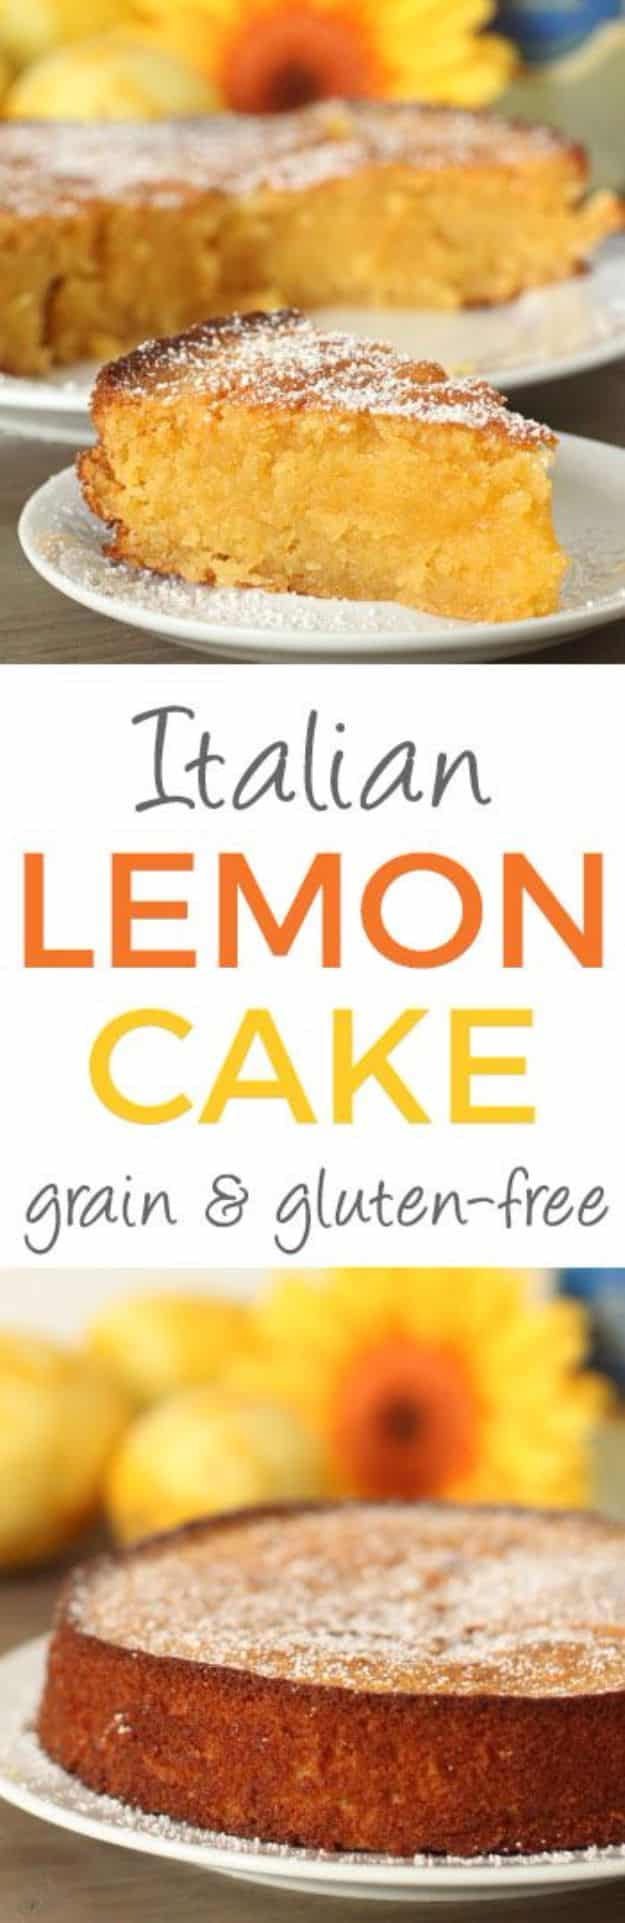 Gluten Free Desserts - Italian Lemon Almond Cake - Easy Recipes and Healthy Recipe Ideas for Cookies, Cake, Pie, Cupcakes, Cheesecake and Ice Cream - Best No Sugar Glutenfree Chocolate, No Bake Dessert, Fruit, Peach, Apple and Banana Dishes - Flourless Christmas, Thanksgiving and Holiday Dishes #glutenfree #desserts #recipes